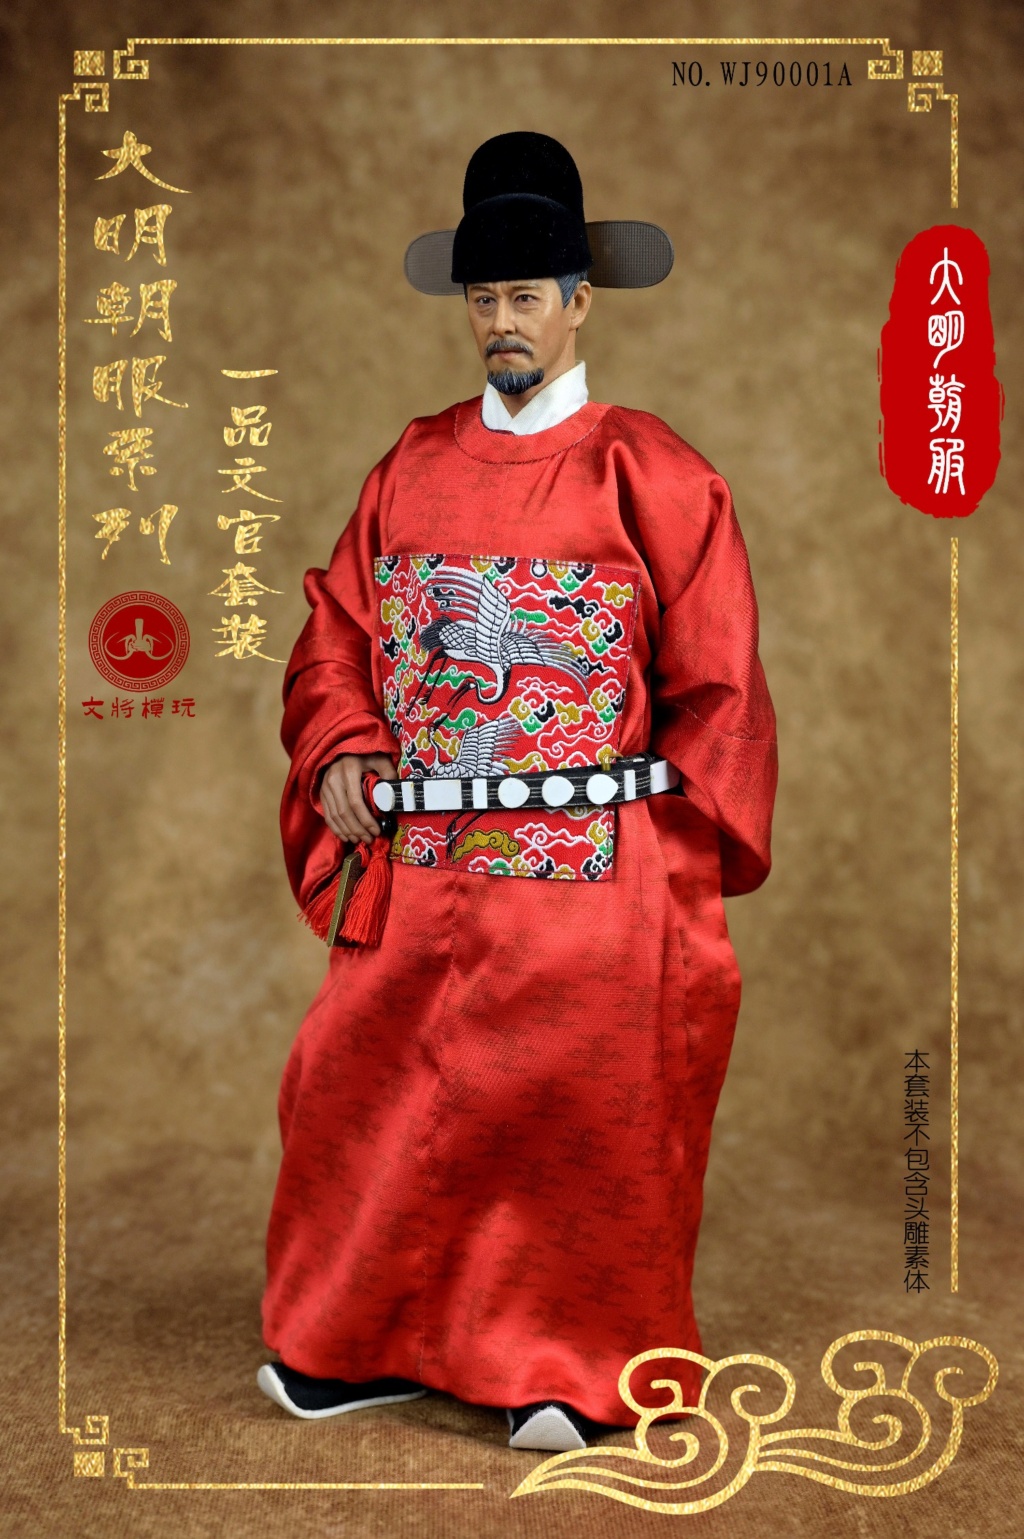 MingDynasty - NEW PRODUCT: Wenjiang Model Play: 1/6 Ming Dynasty Clothes Series - Yipin Civilian/Military Officer Set WJ90001A/B 16473810